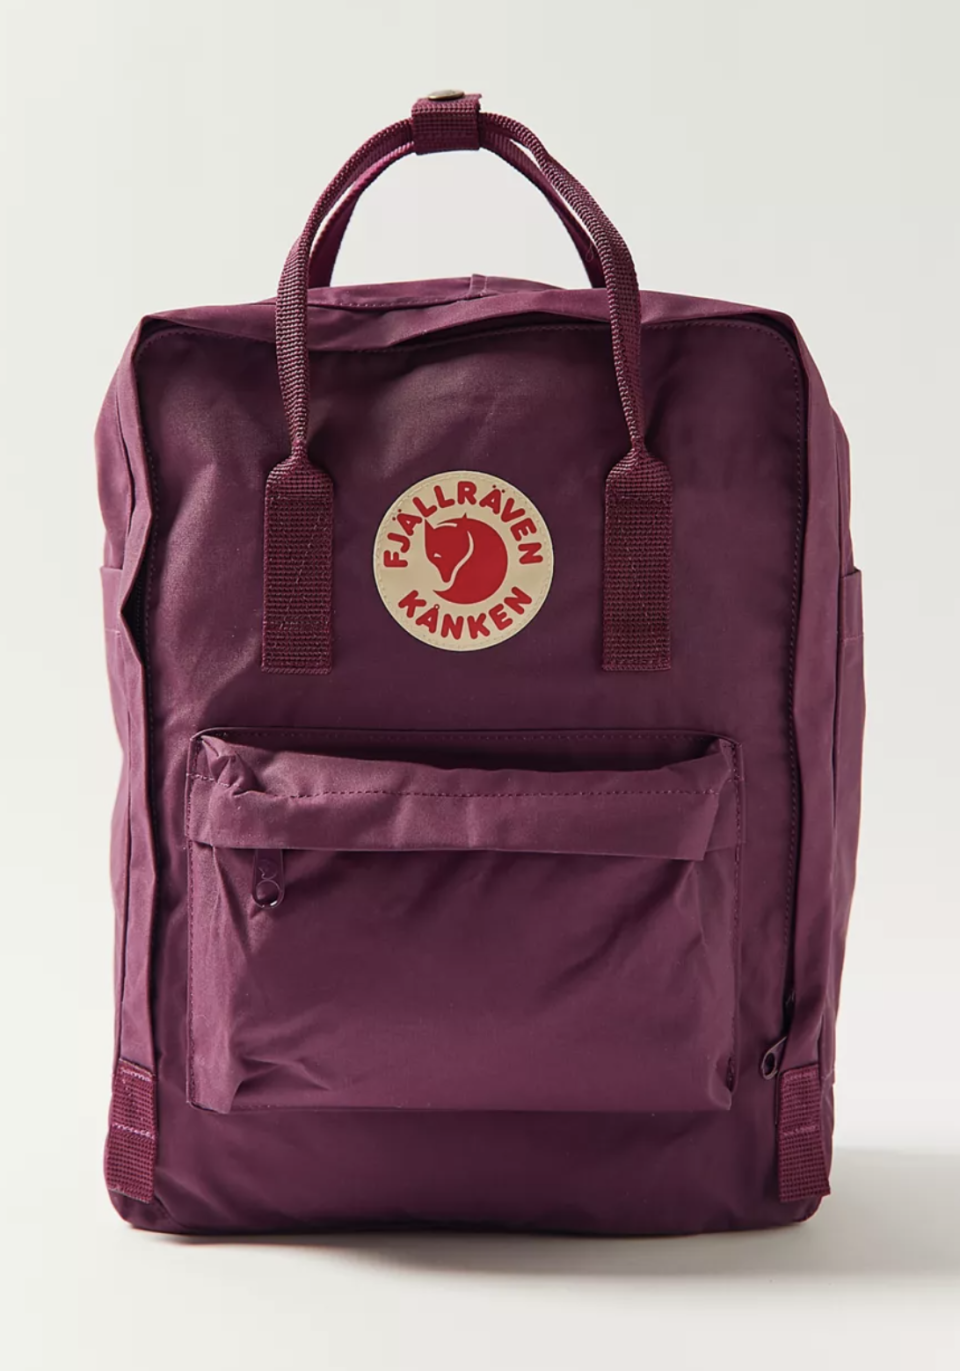 <p><strong>Fjallraven</strong></p><p>urbanoutfitters.com</p><p><strong>$80.00</strong></p><p>Add pins, keychains, and patches onto your bag to make it your own. </p>